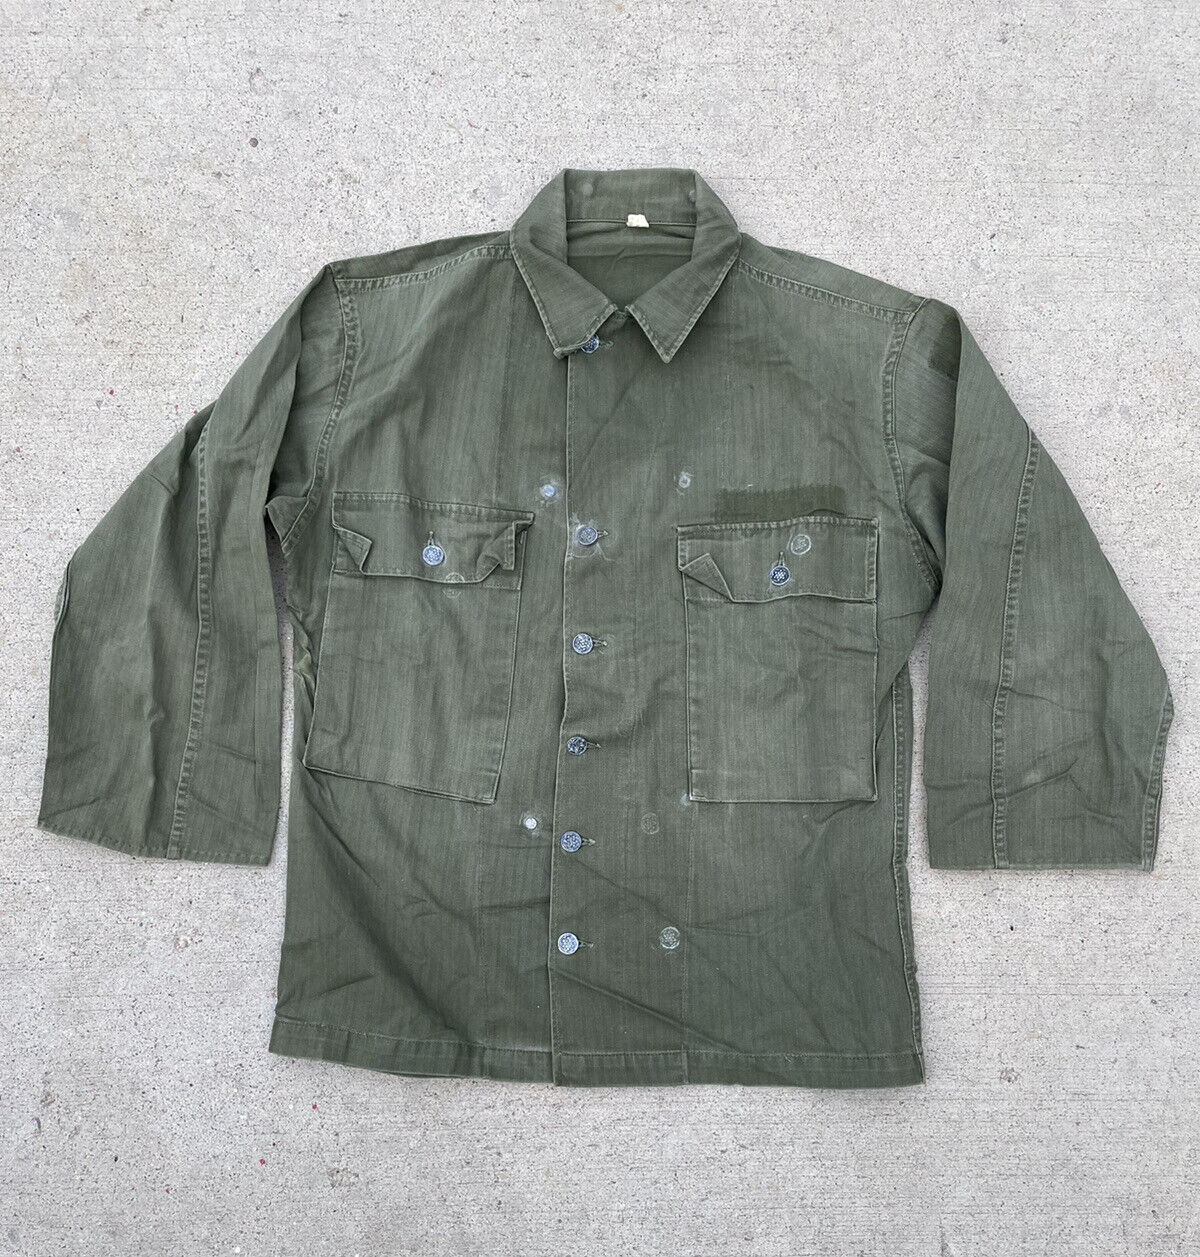 VINTAGE WWII HBT Army Jacket 13 Star Buttons DISTRESSED Men’s Size Small